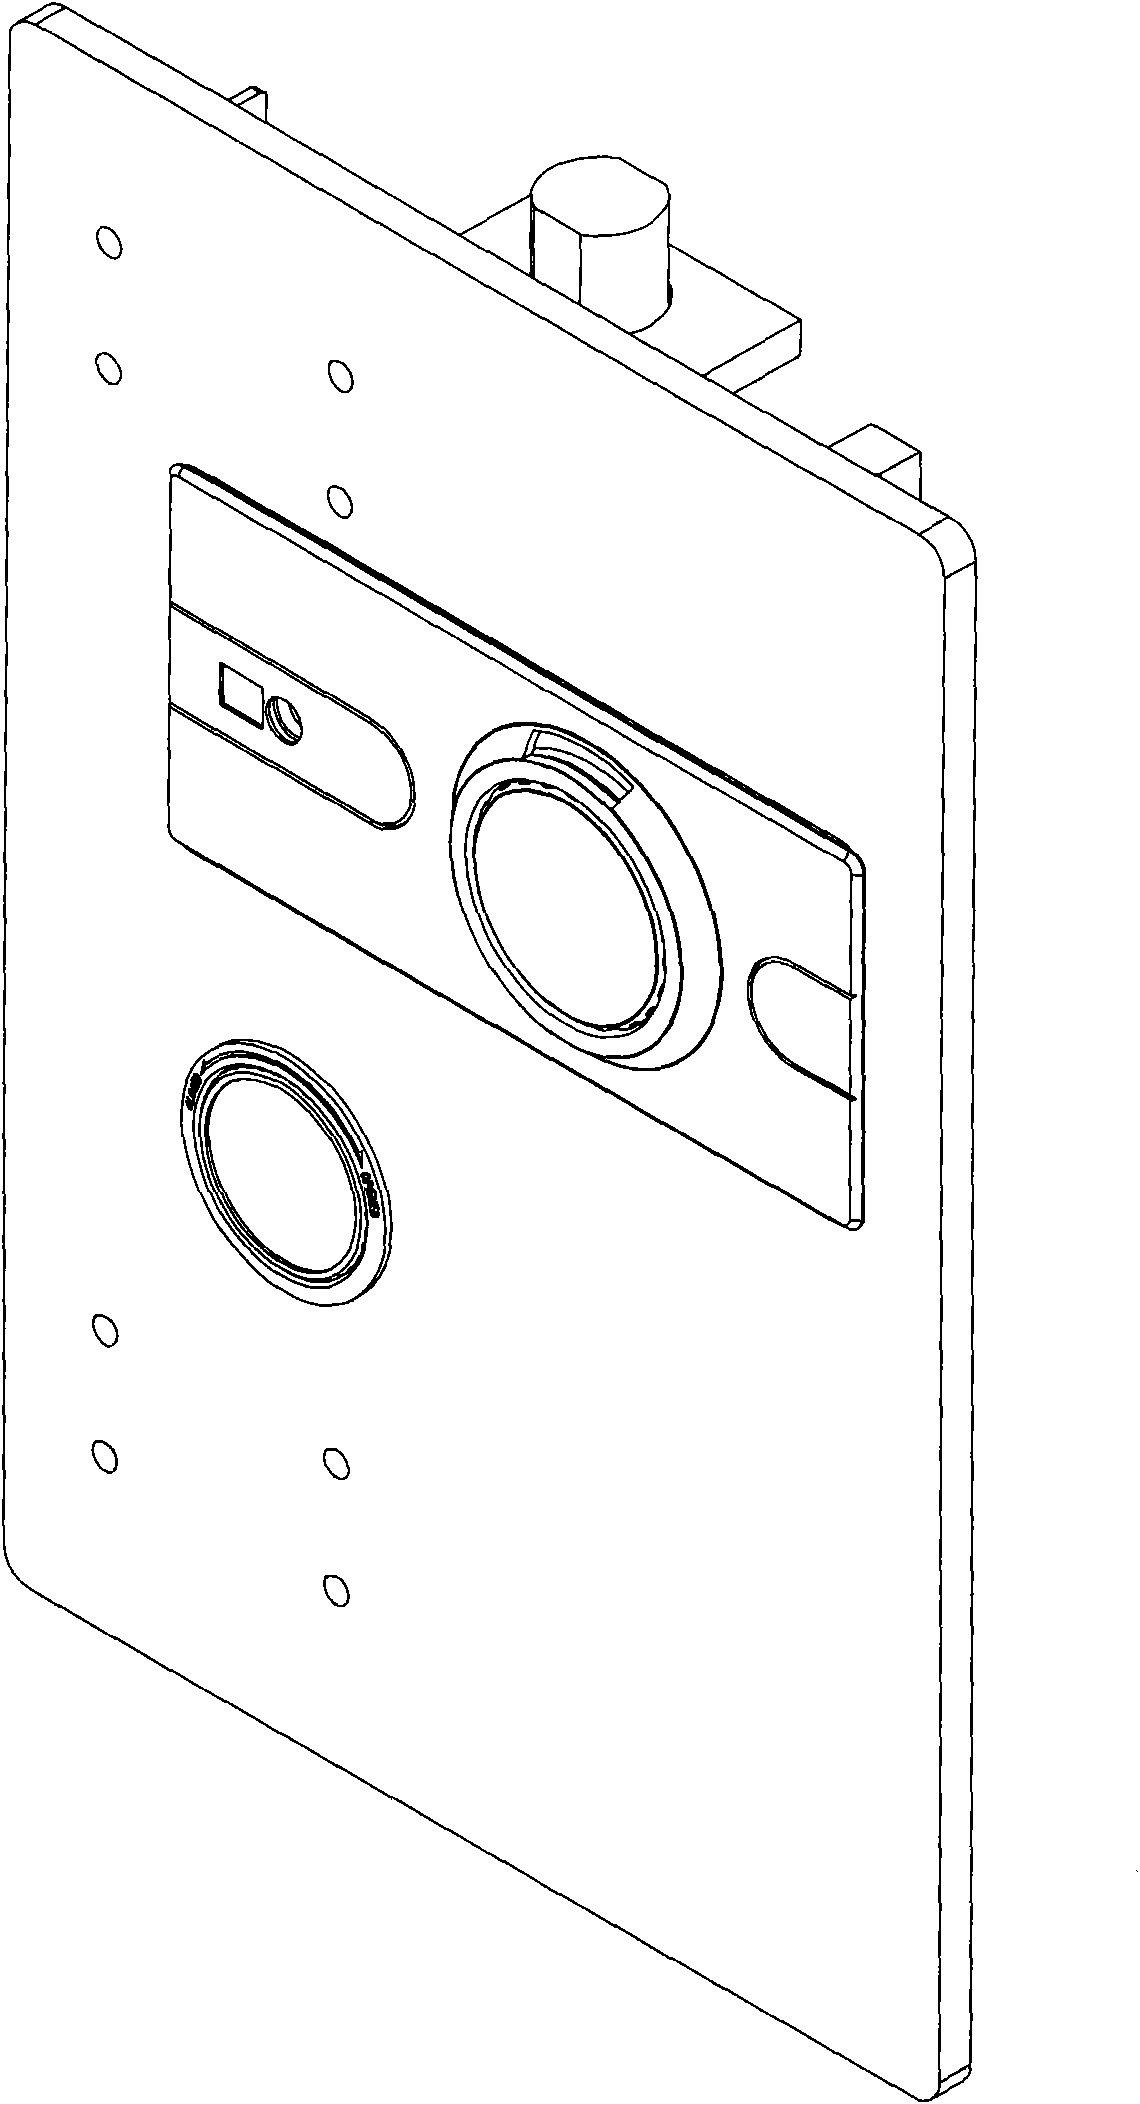 Contractible mechanical coded lock device